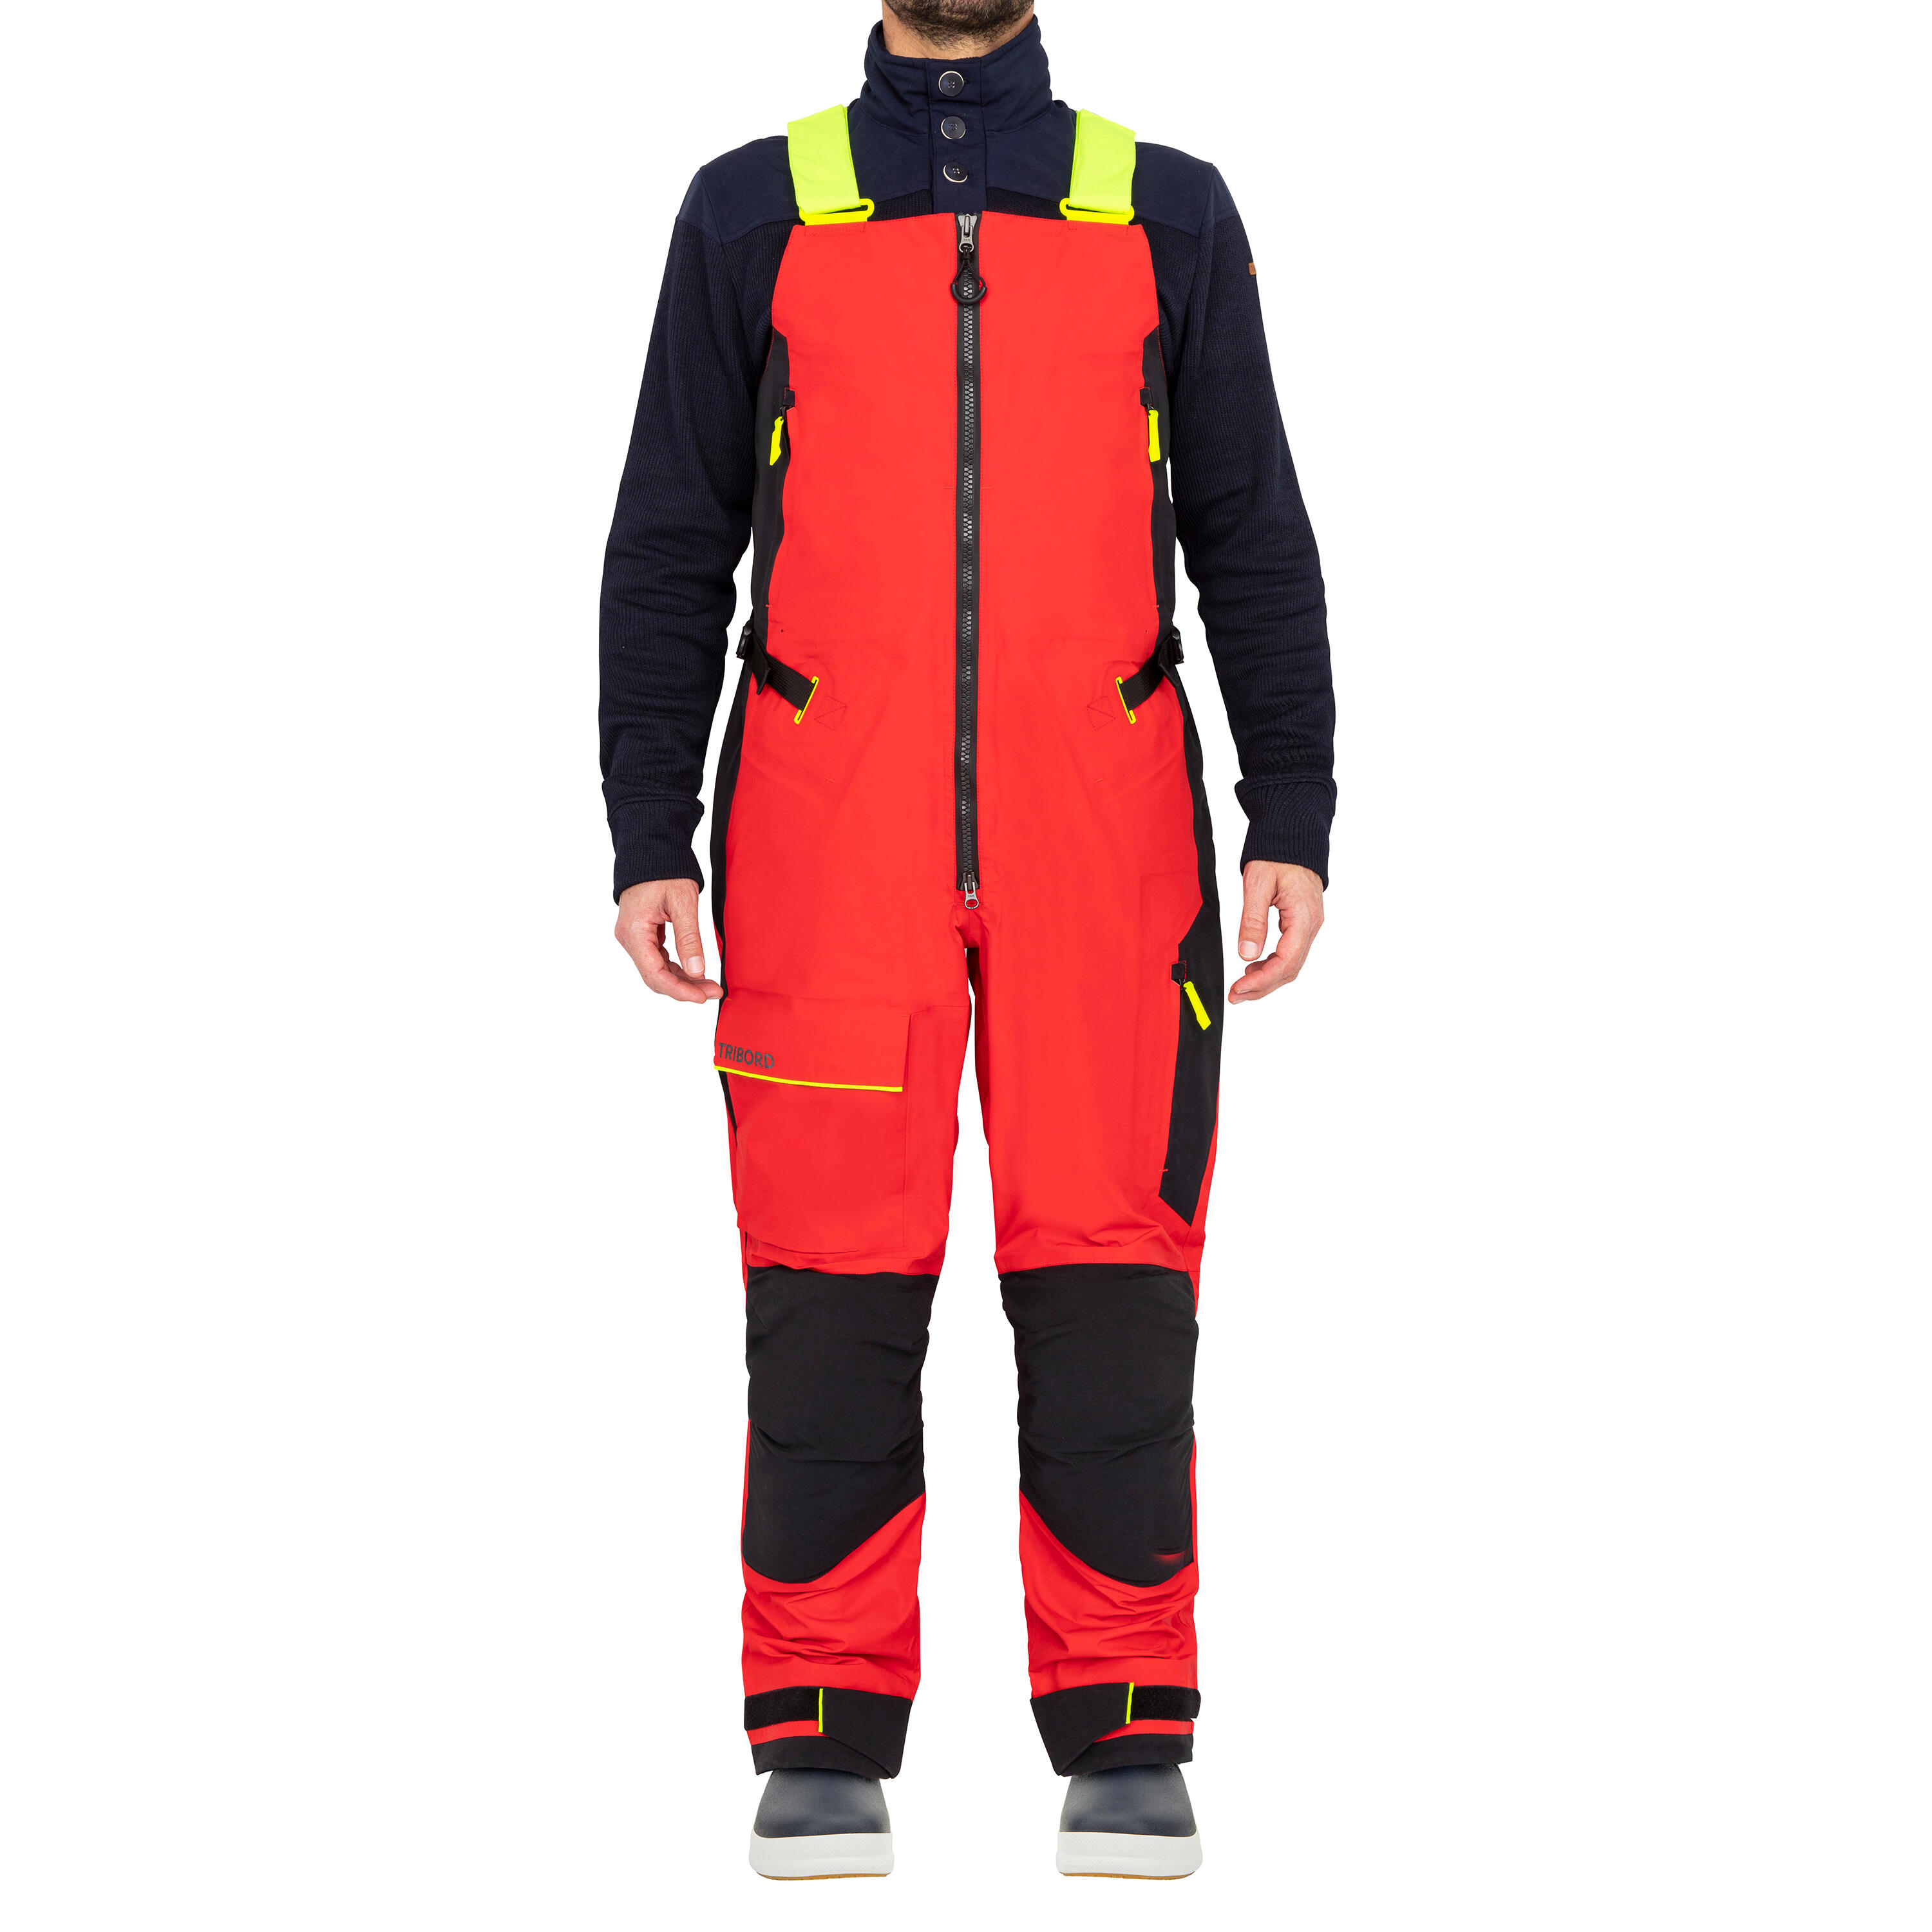 Adult Sailing overalls - Offshore 900 OPEN dropseat red 2/16